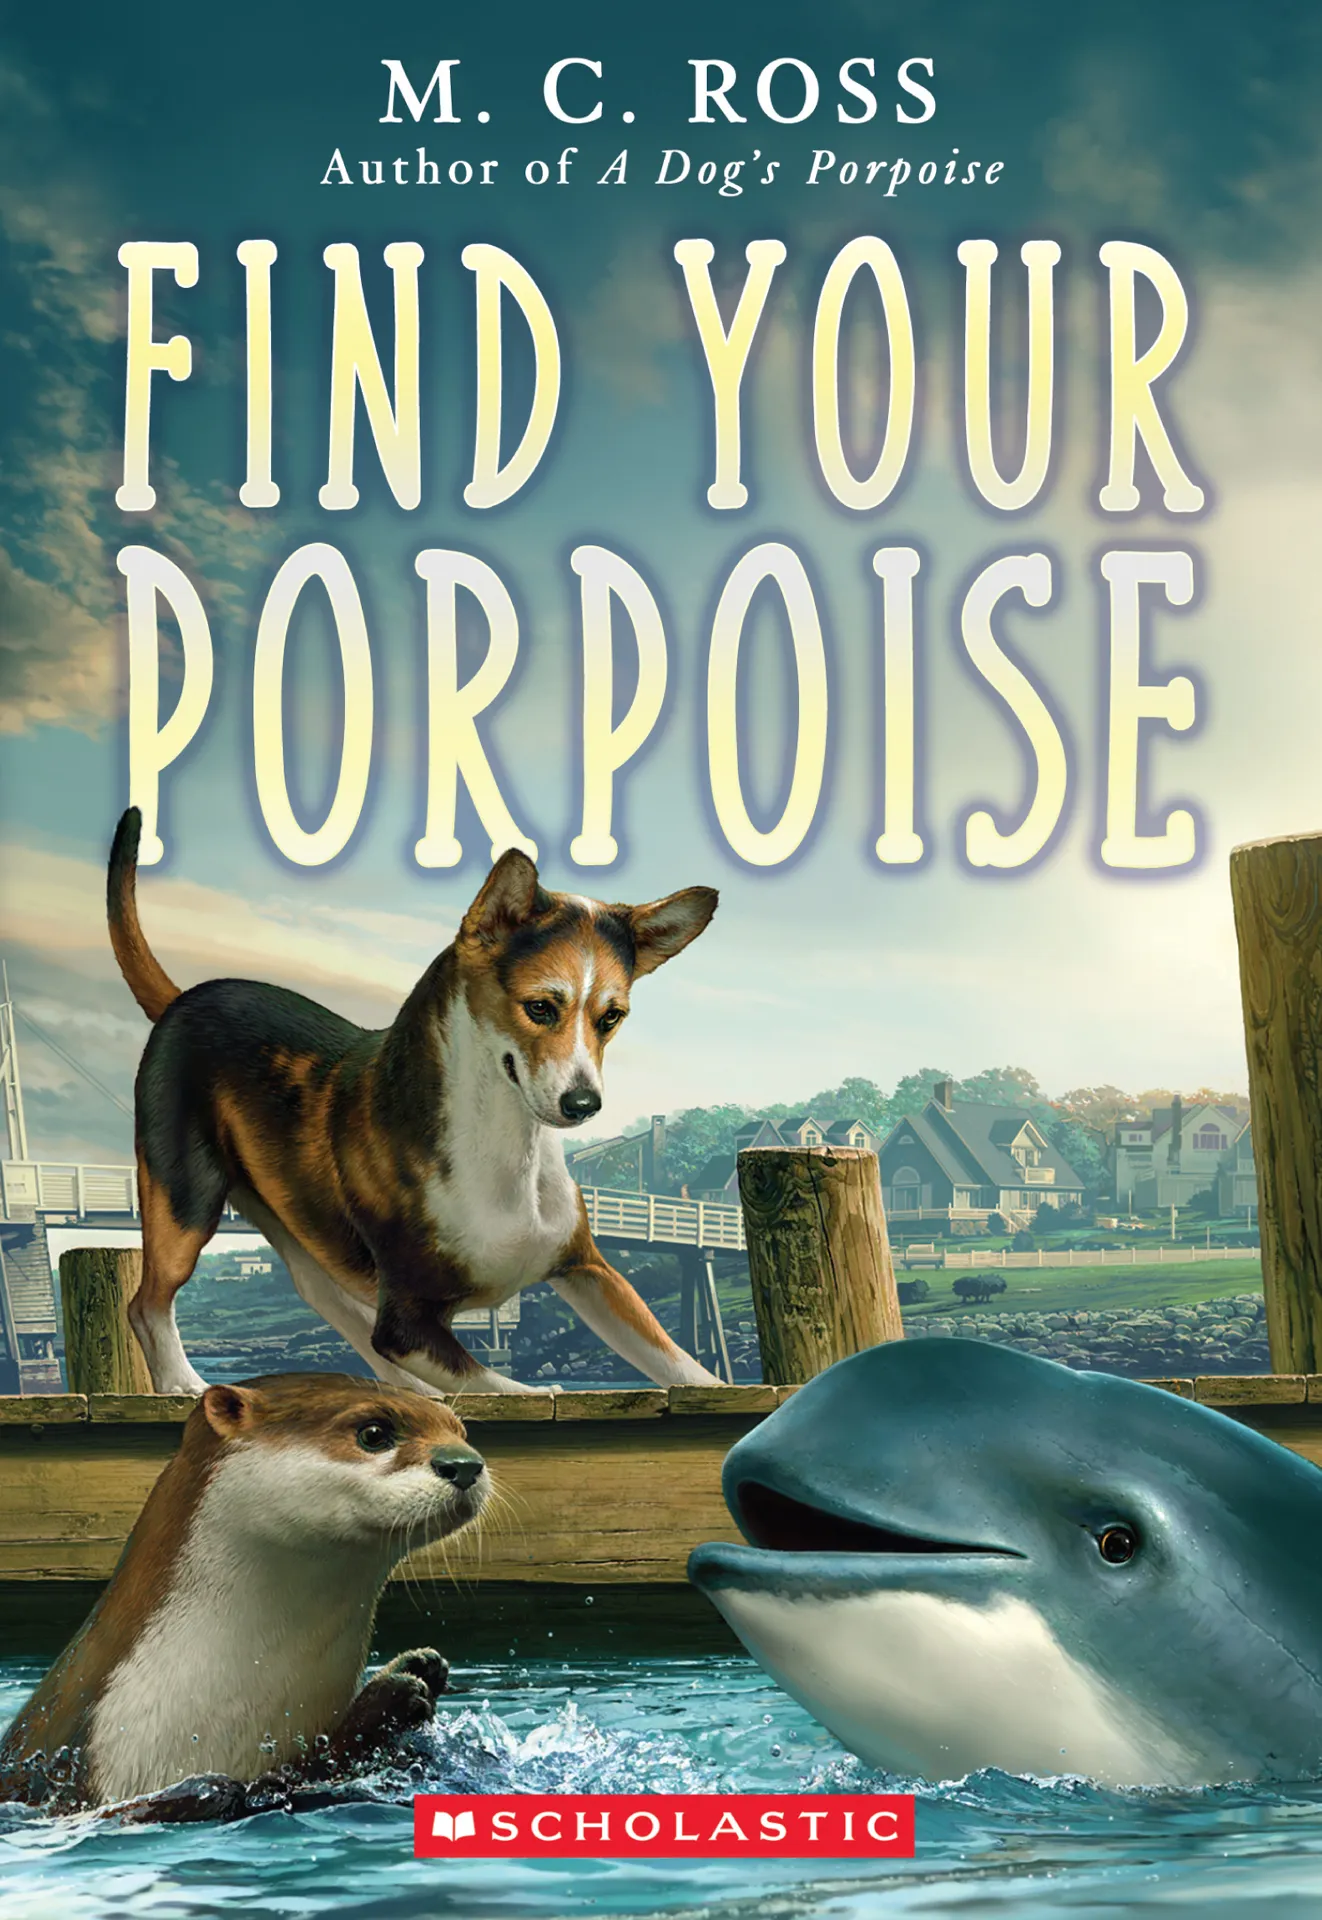 Find Your Porpoise (A Dog's Porpoise #2)